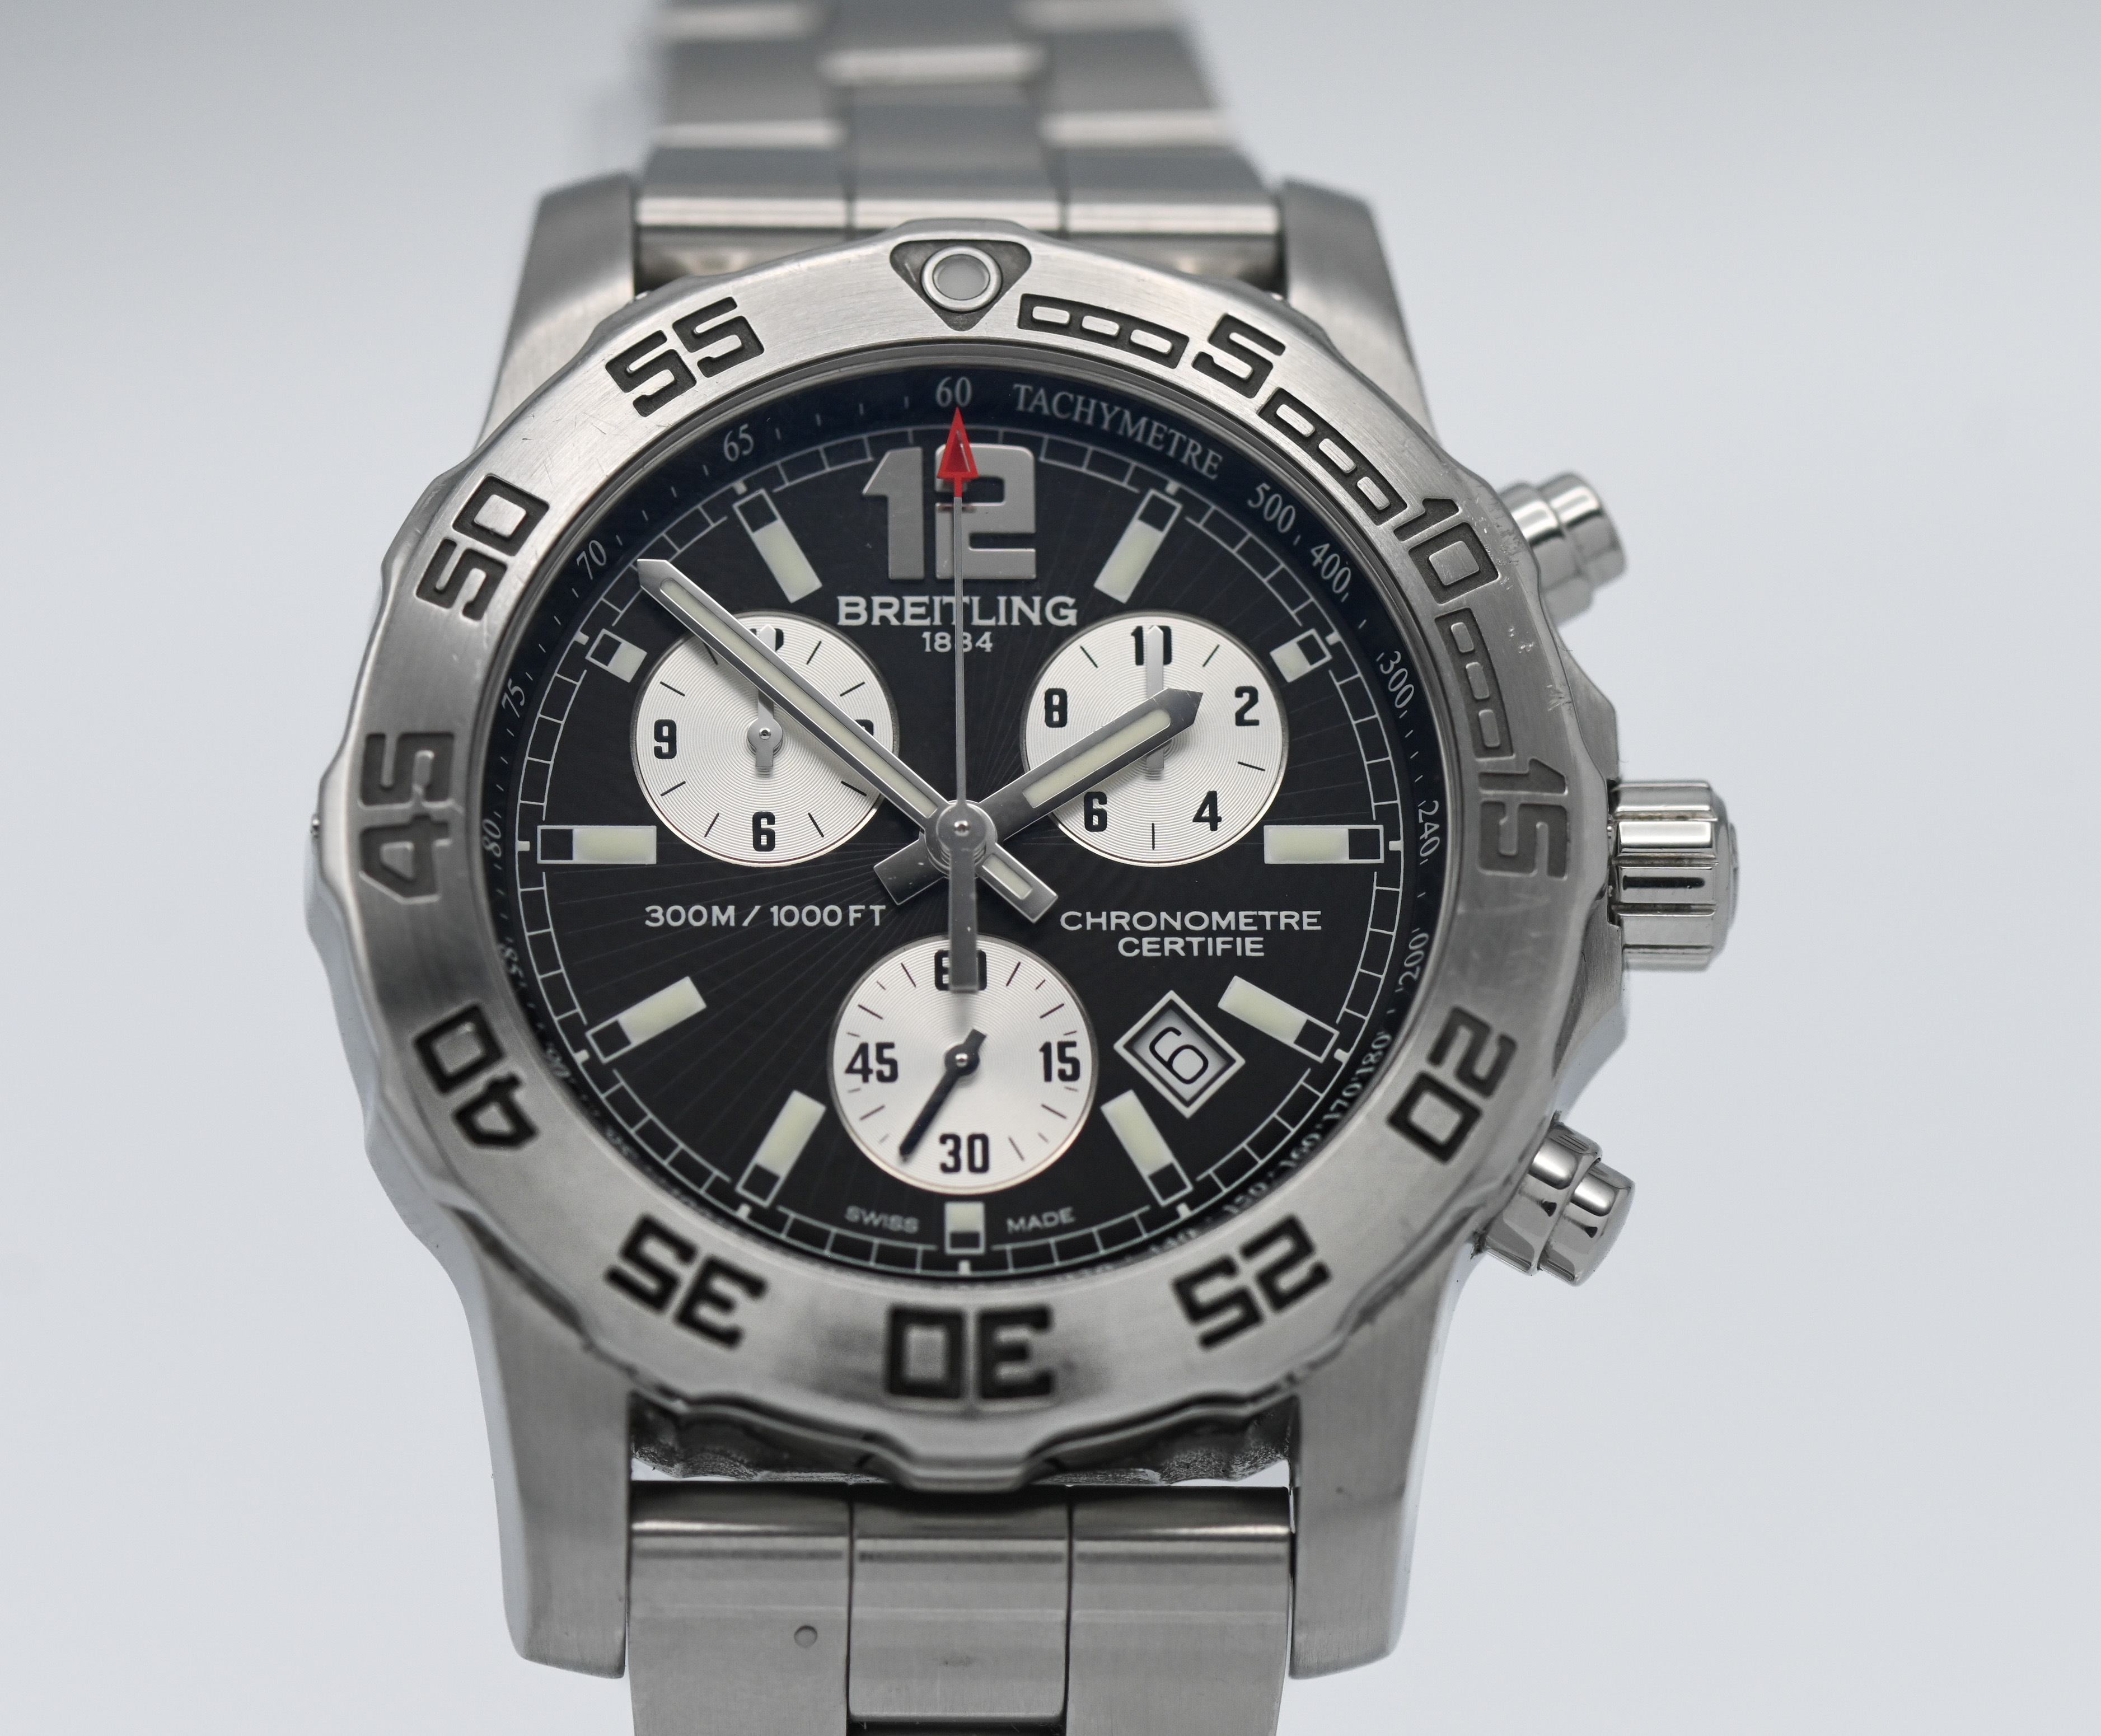 Breitling, a gents Chronograph Chronometer Certified wristwatch, reference number A7338710/BB49,